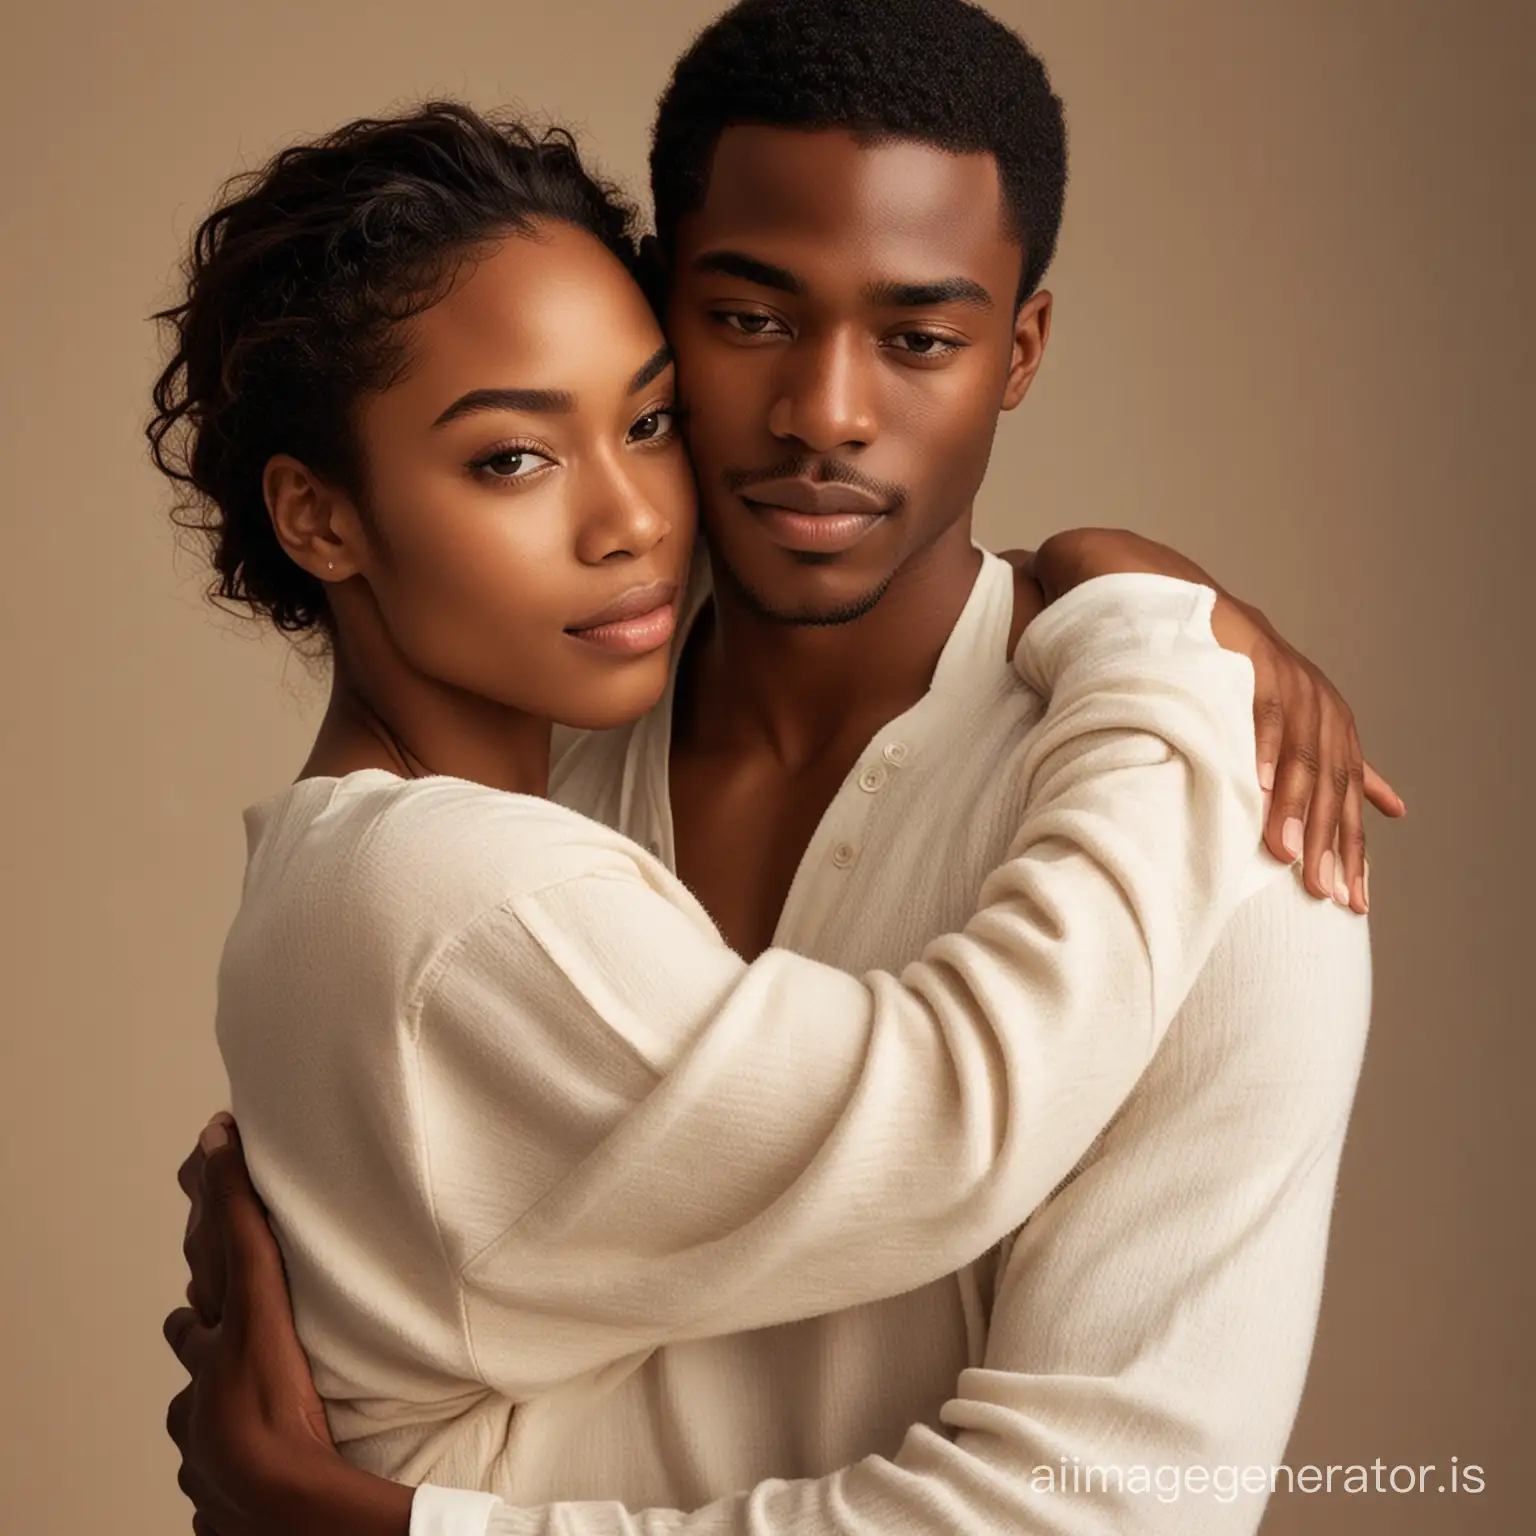 Affectionate-African-American-Couple-Embracing-in-Intimate-Attire